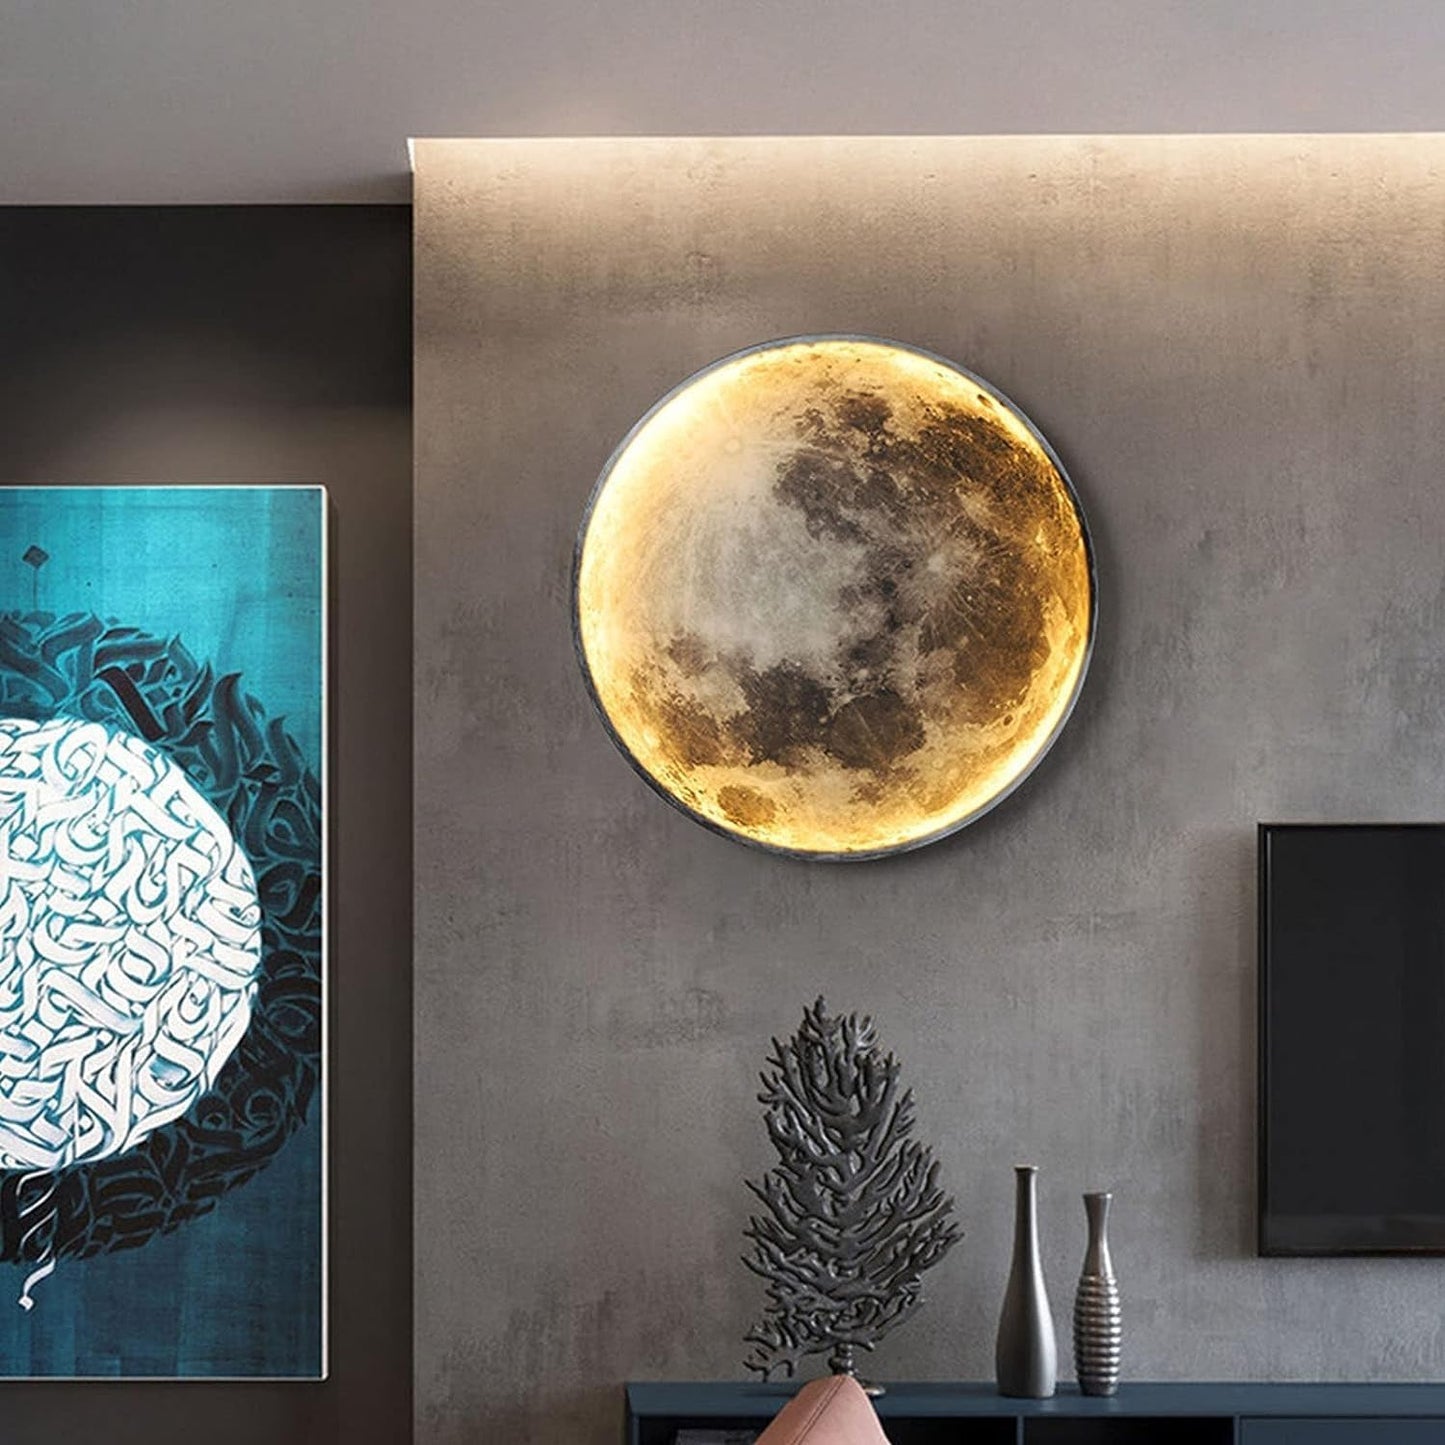 The moon in a room